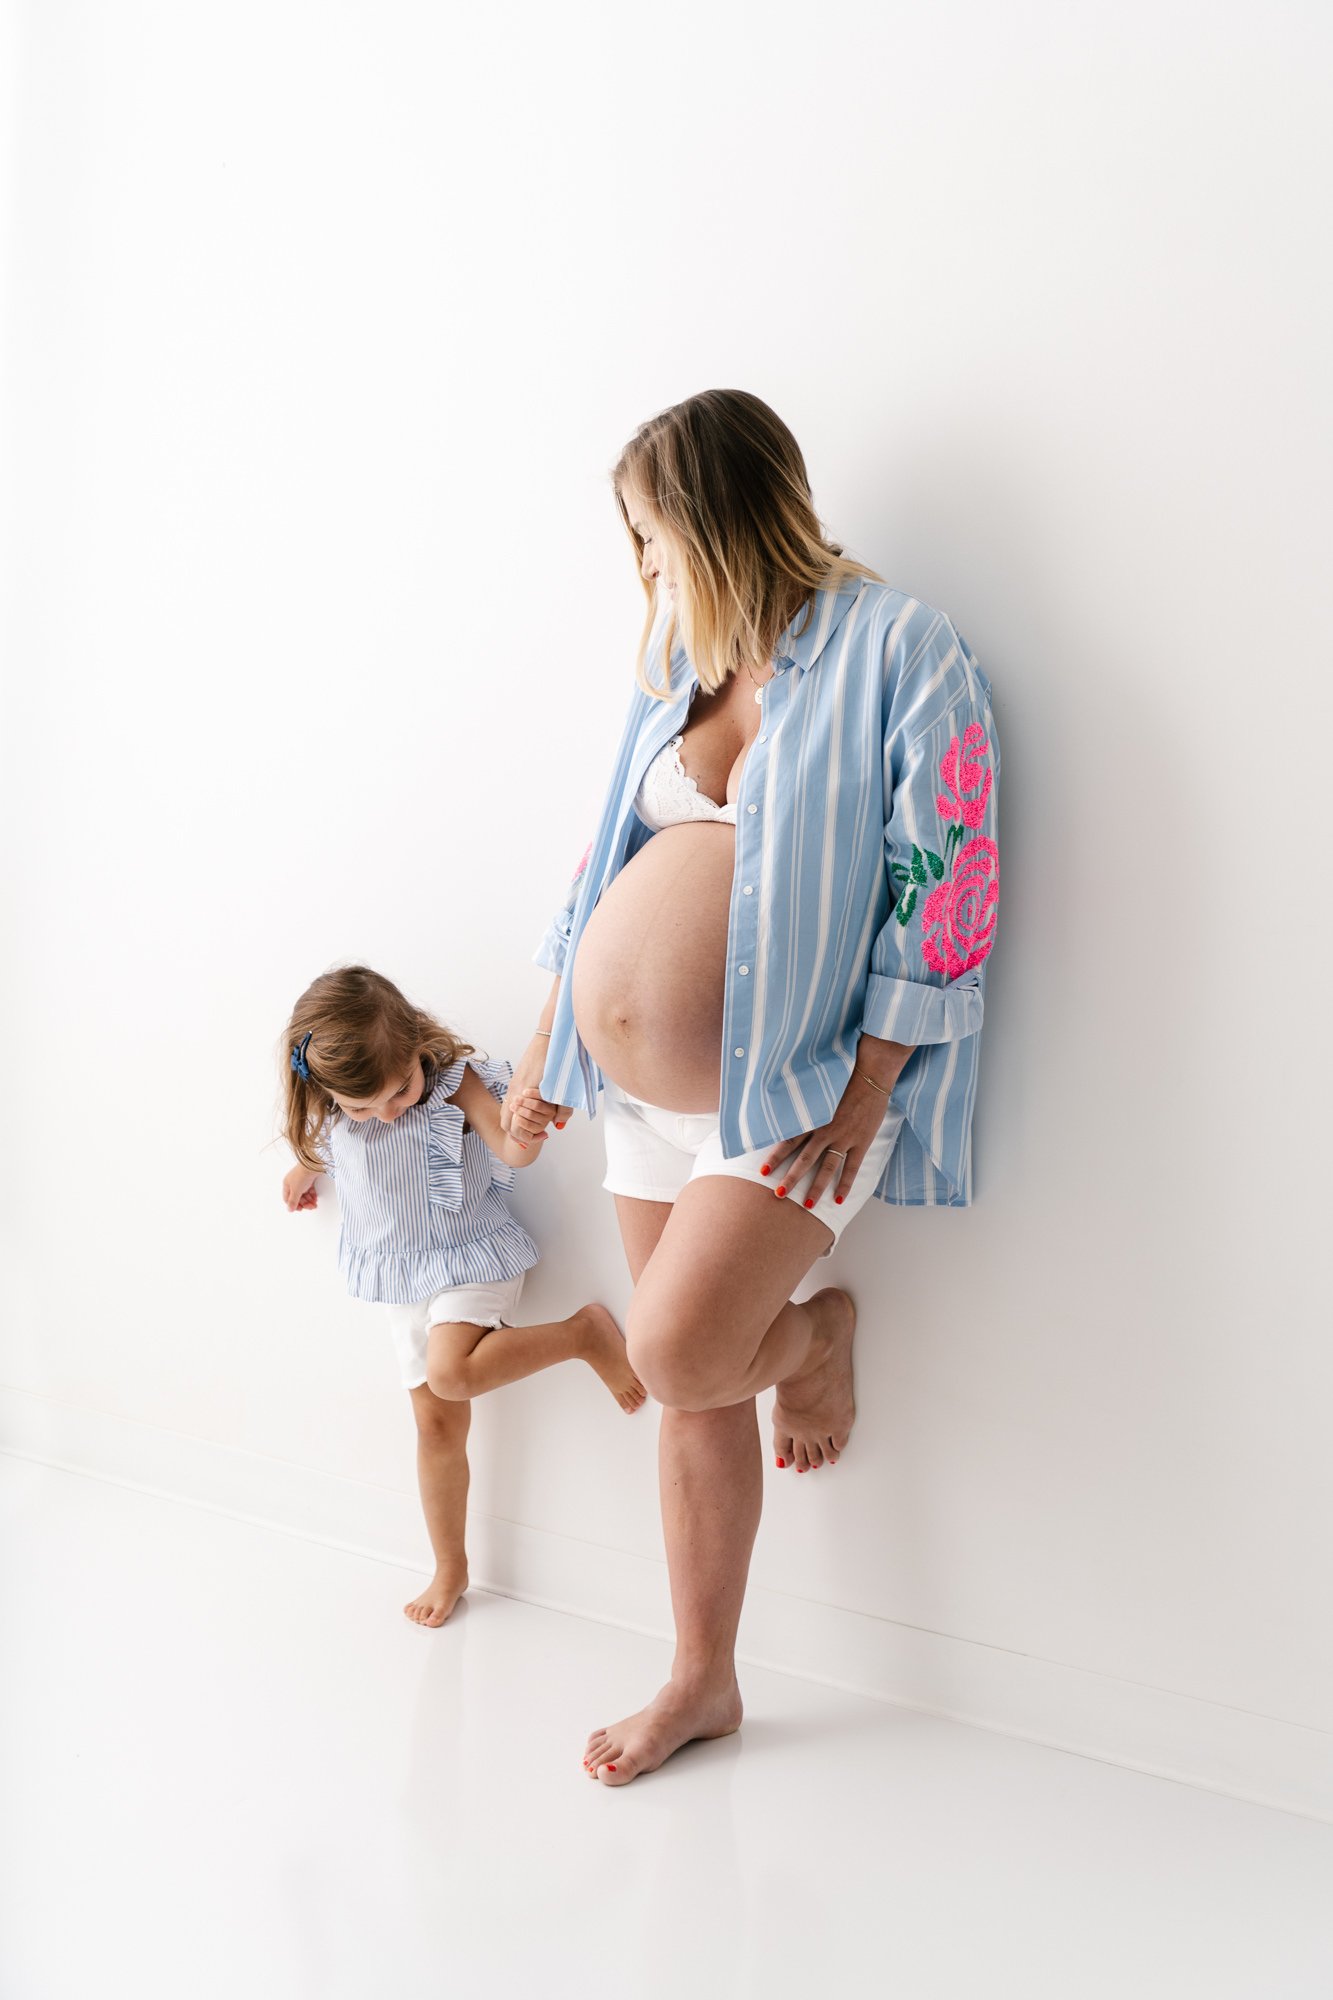  New Jersey maternity photographer Nicole Hawkins Photography captures a pregnant mother and daughter standing together playing against a wall. mother portrait baby on the way pregnancy bump portrait #NicoleHawkinsPhotography #NicoleHawkinsMaternity 